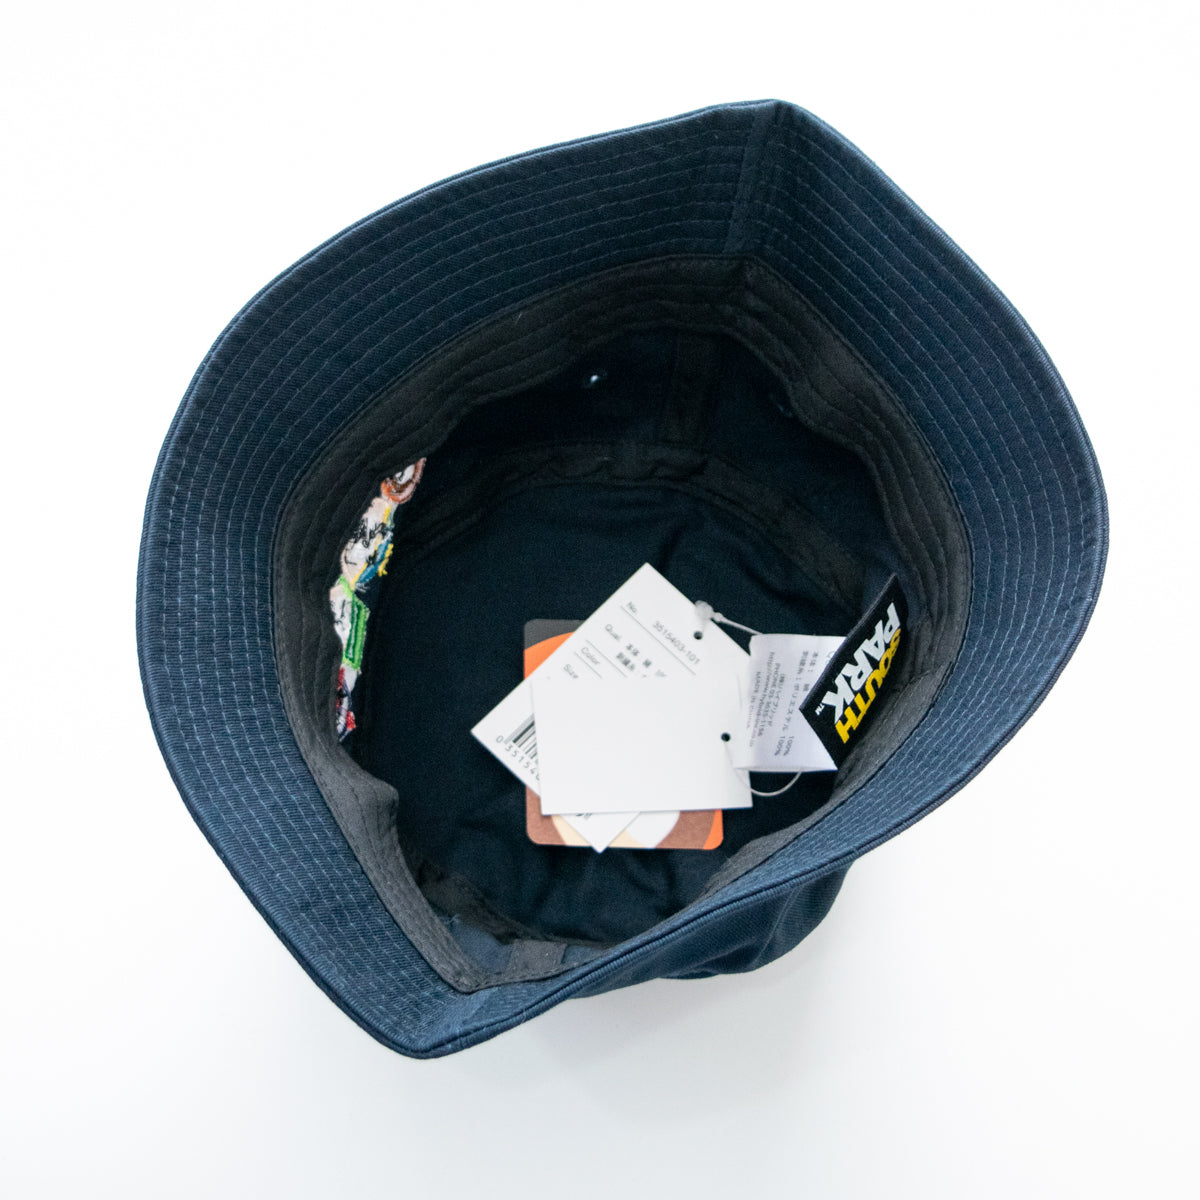 South Park embroidery bucket hat navy